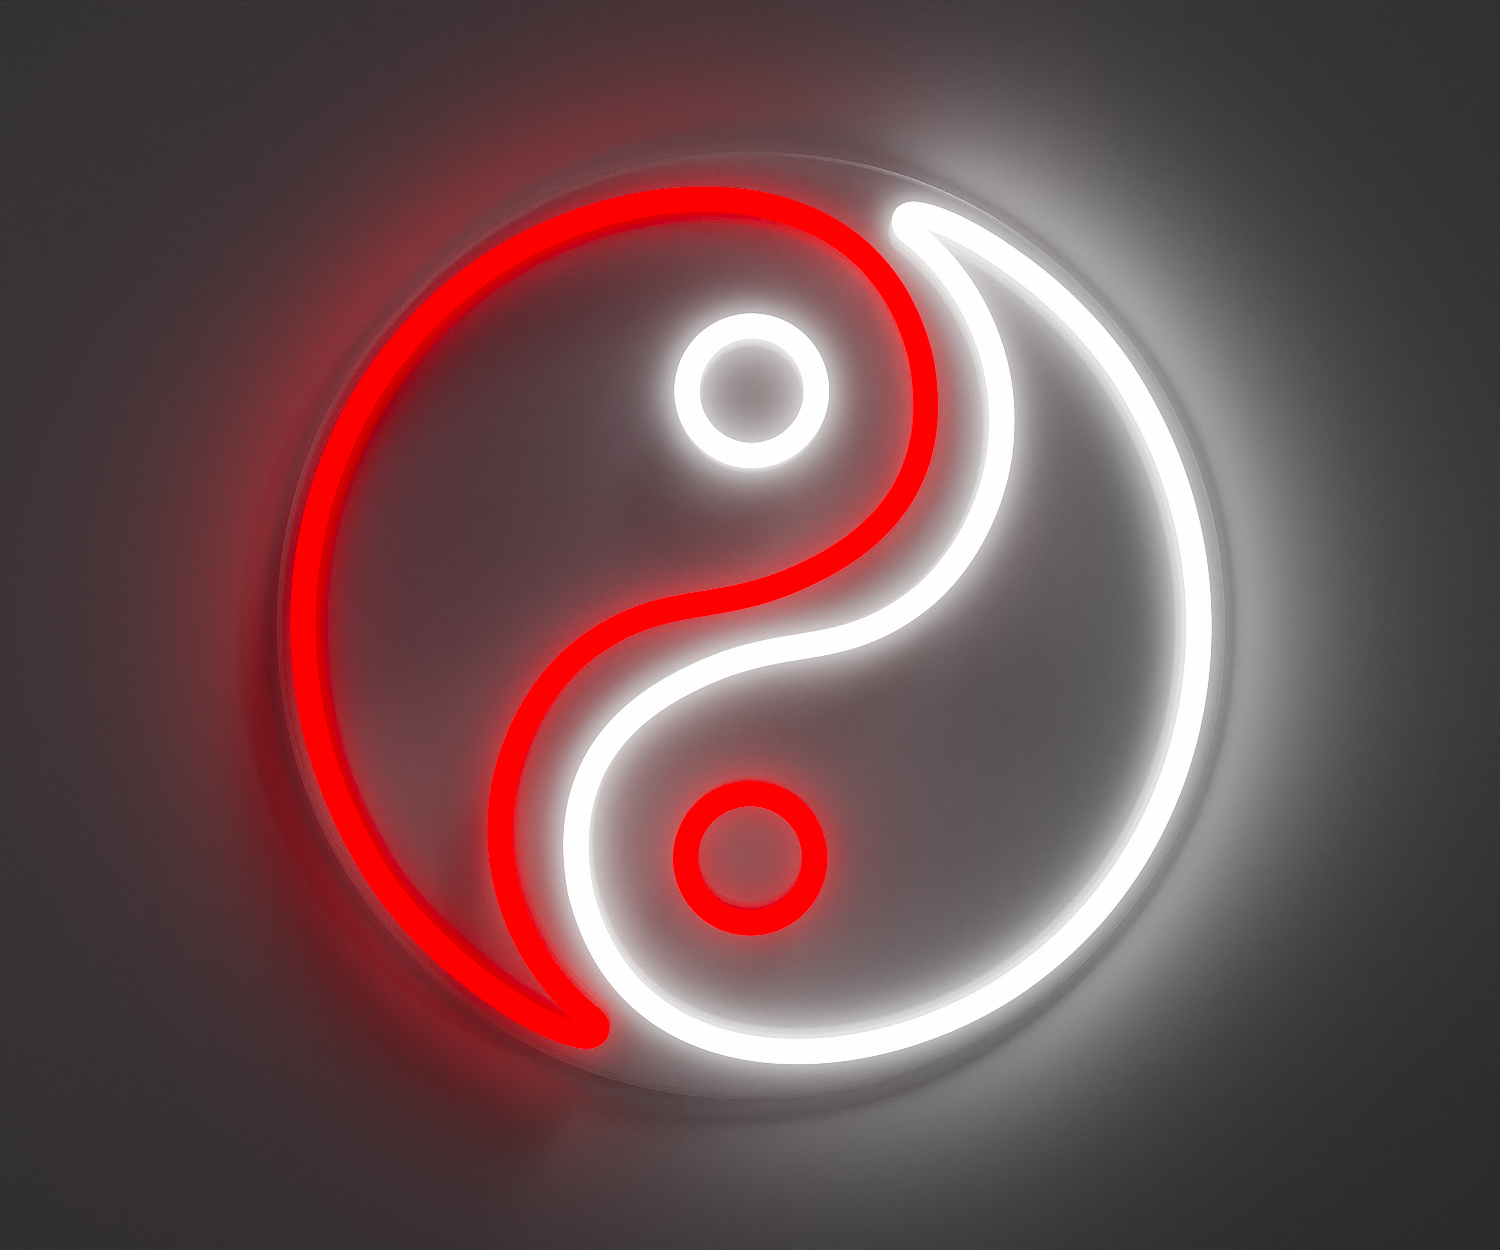 Yin Yang neon sign, red and white